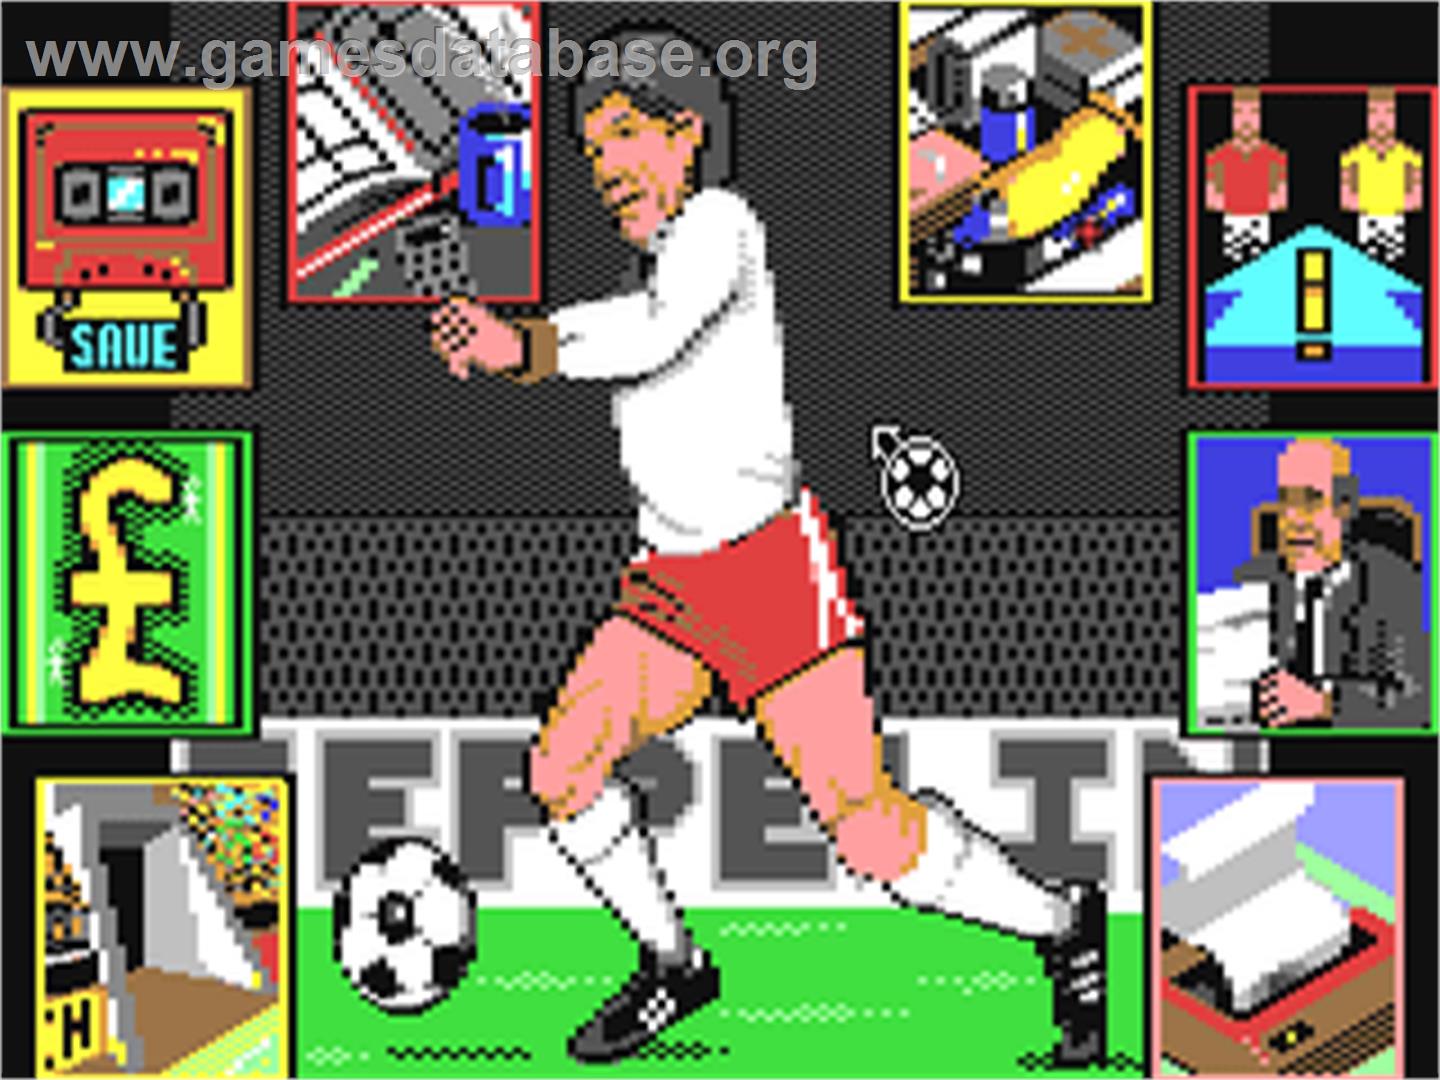 Graeme Souness Soccer Manager - Commodore 64 - Artwork - In Game